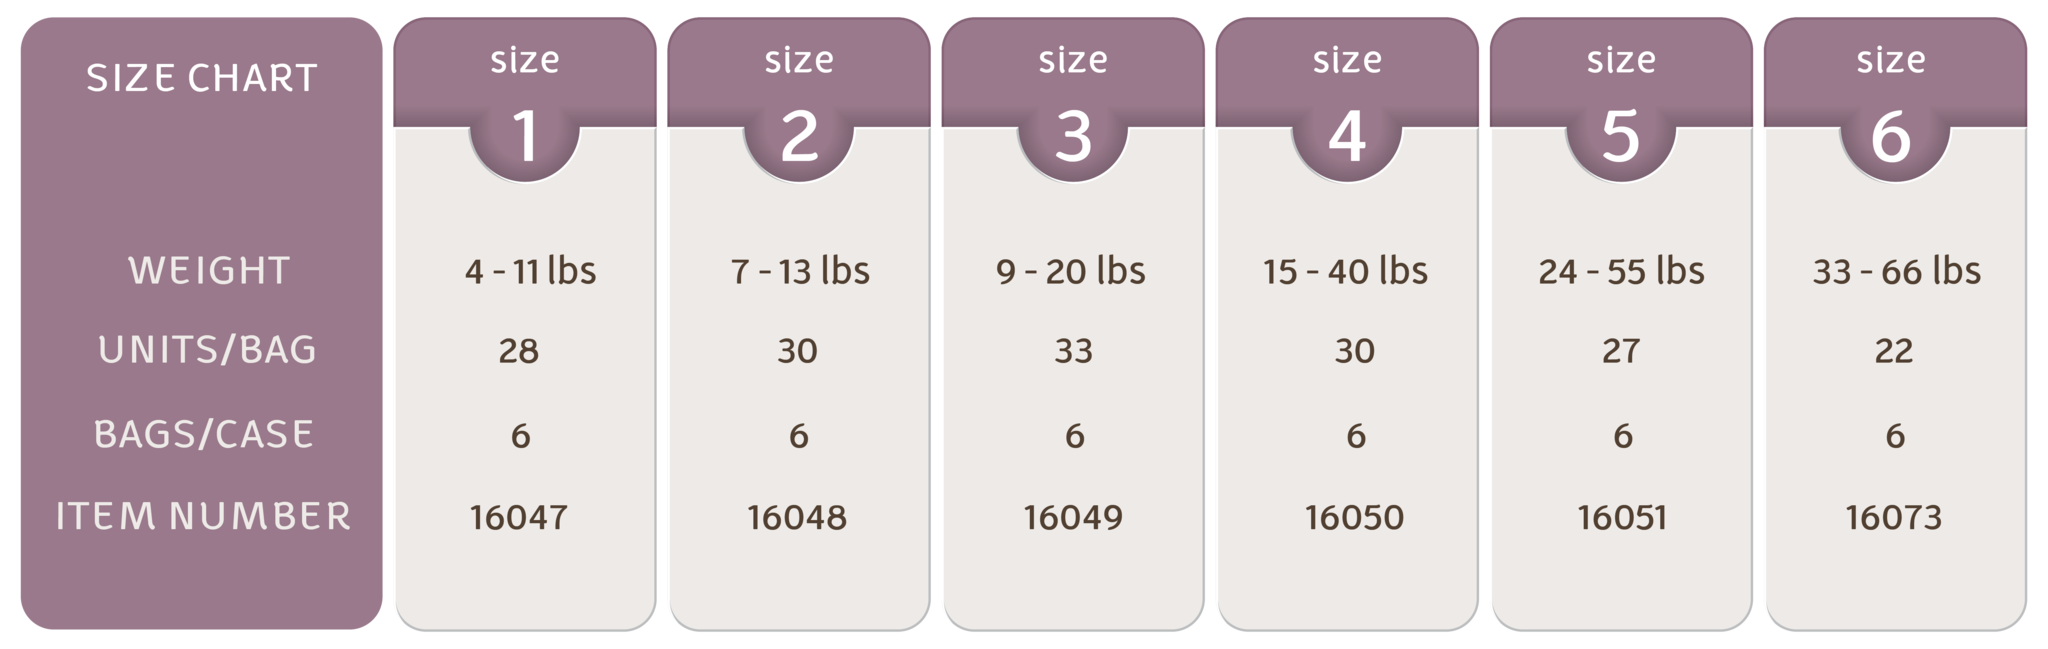 Pampers Size 2 Chart